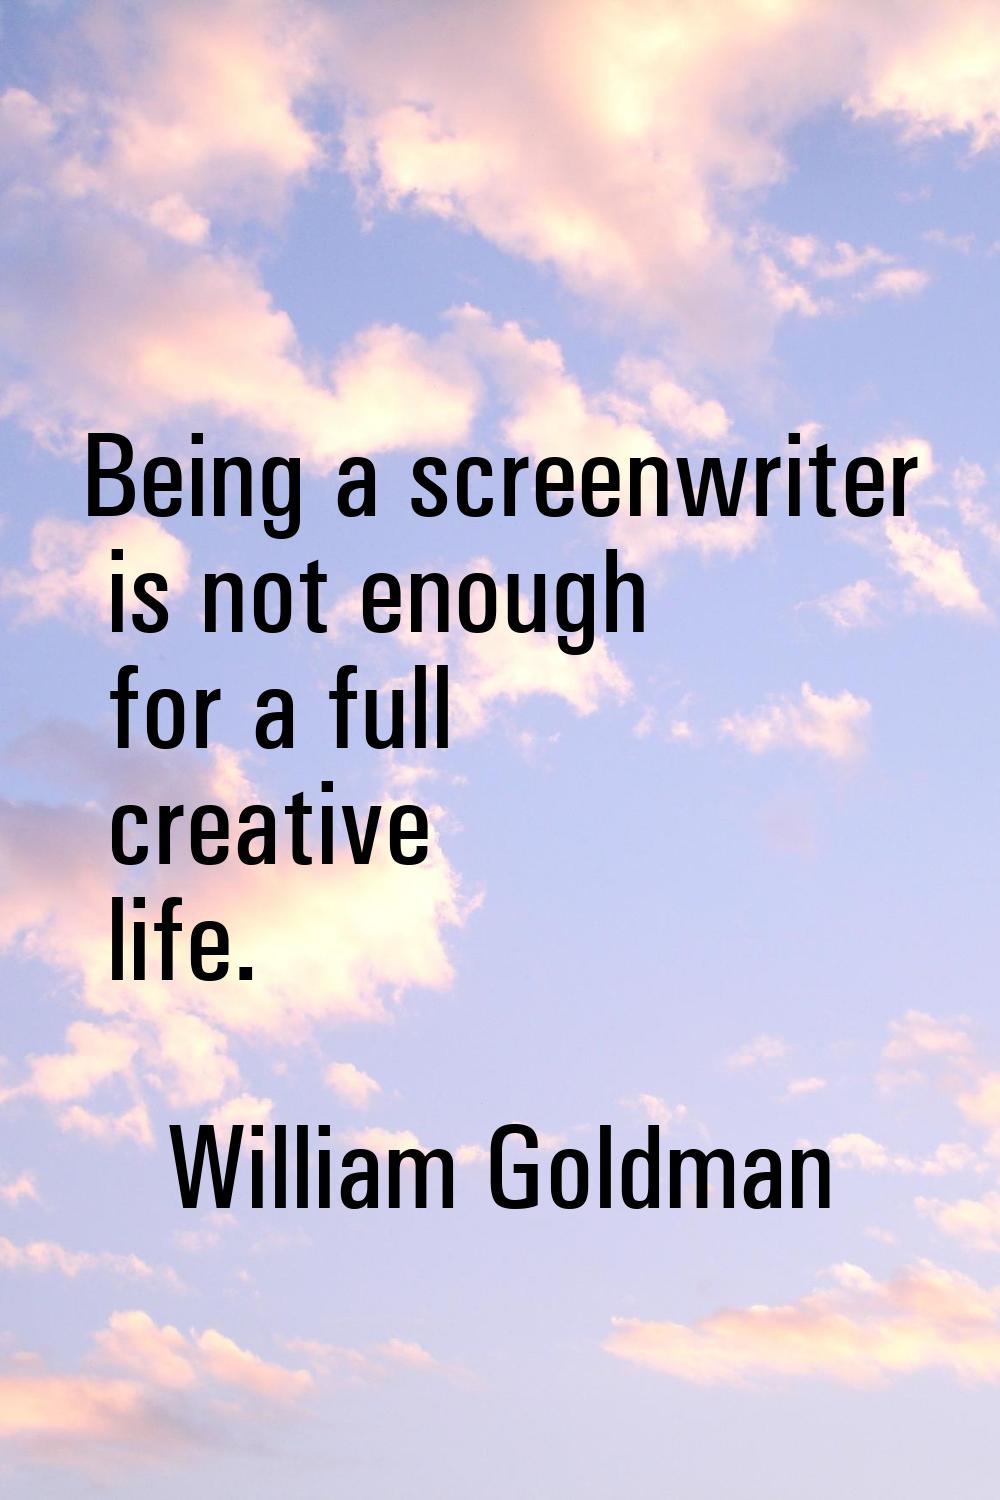 Being a screenwriter is not enough for a full creative life.